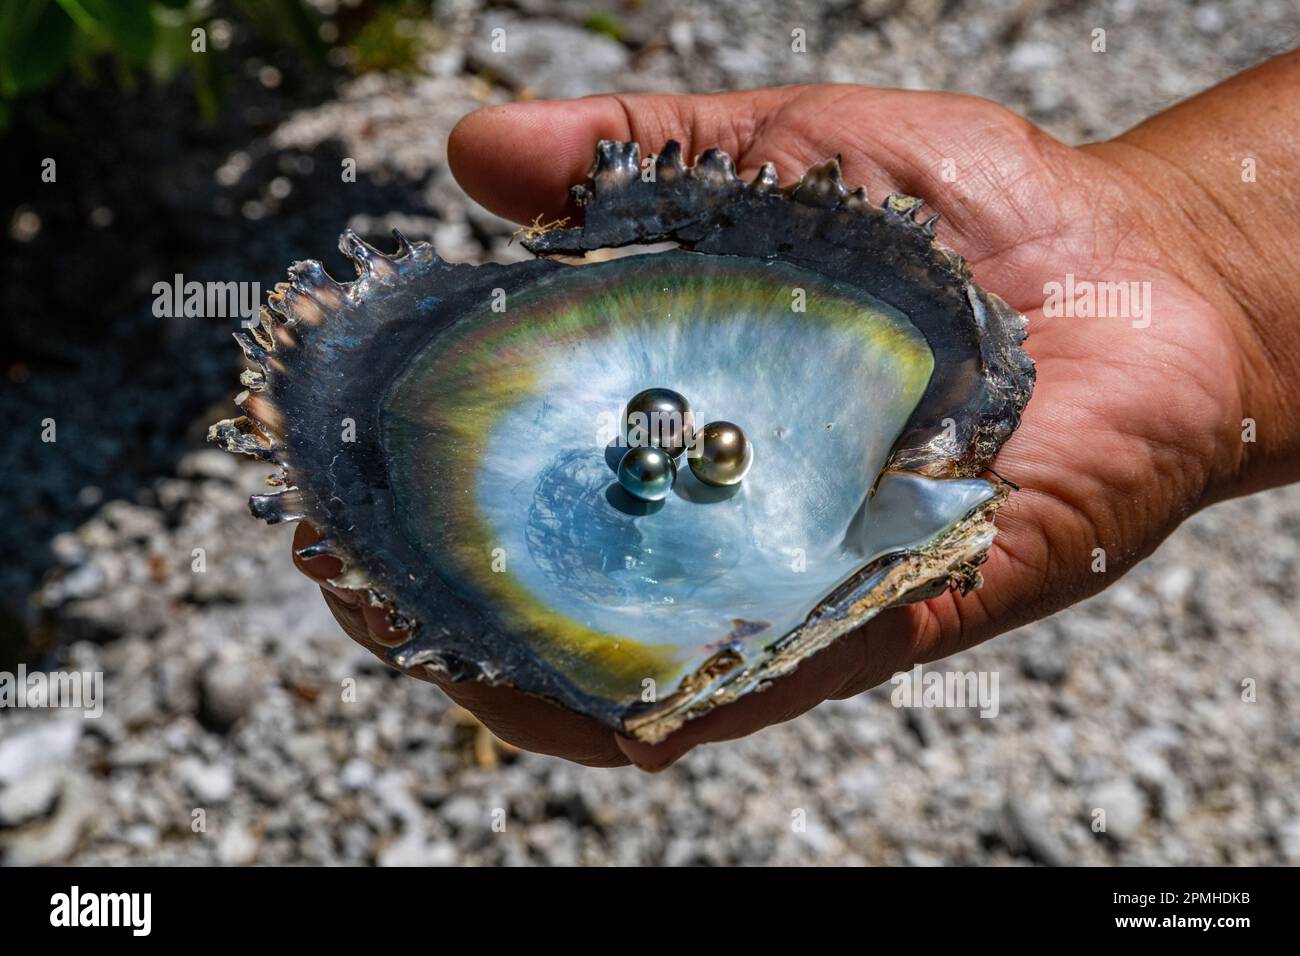 Pearl in a shell with Mother of Pearl, Gaugain Pearl Farm, Rangiroa atoll, Tuamotus, French Polynesia, South Pacific, Pacific Stock Photo